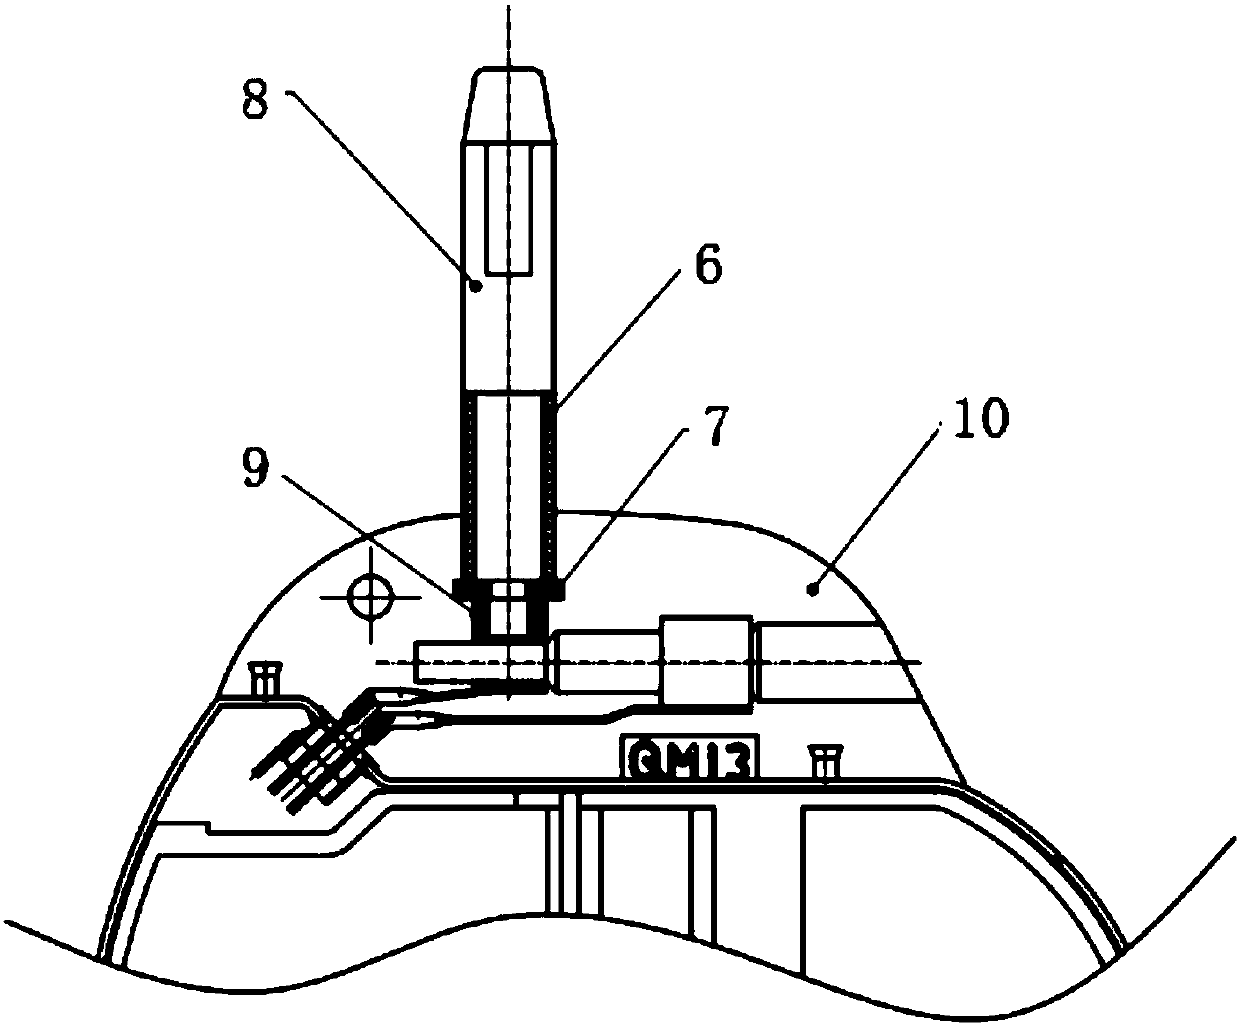 Implantable cardiac pacemaker connector sealing structure